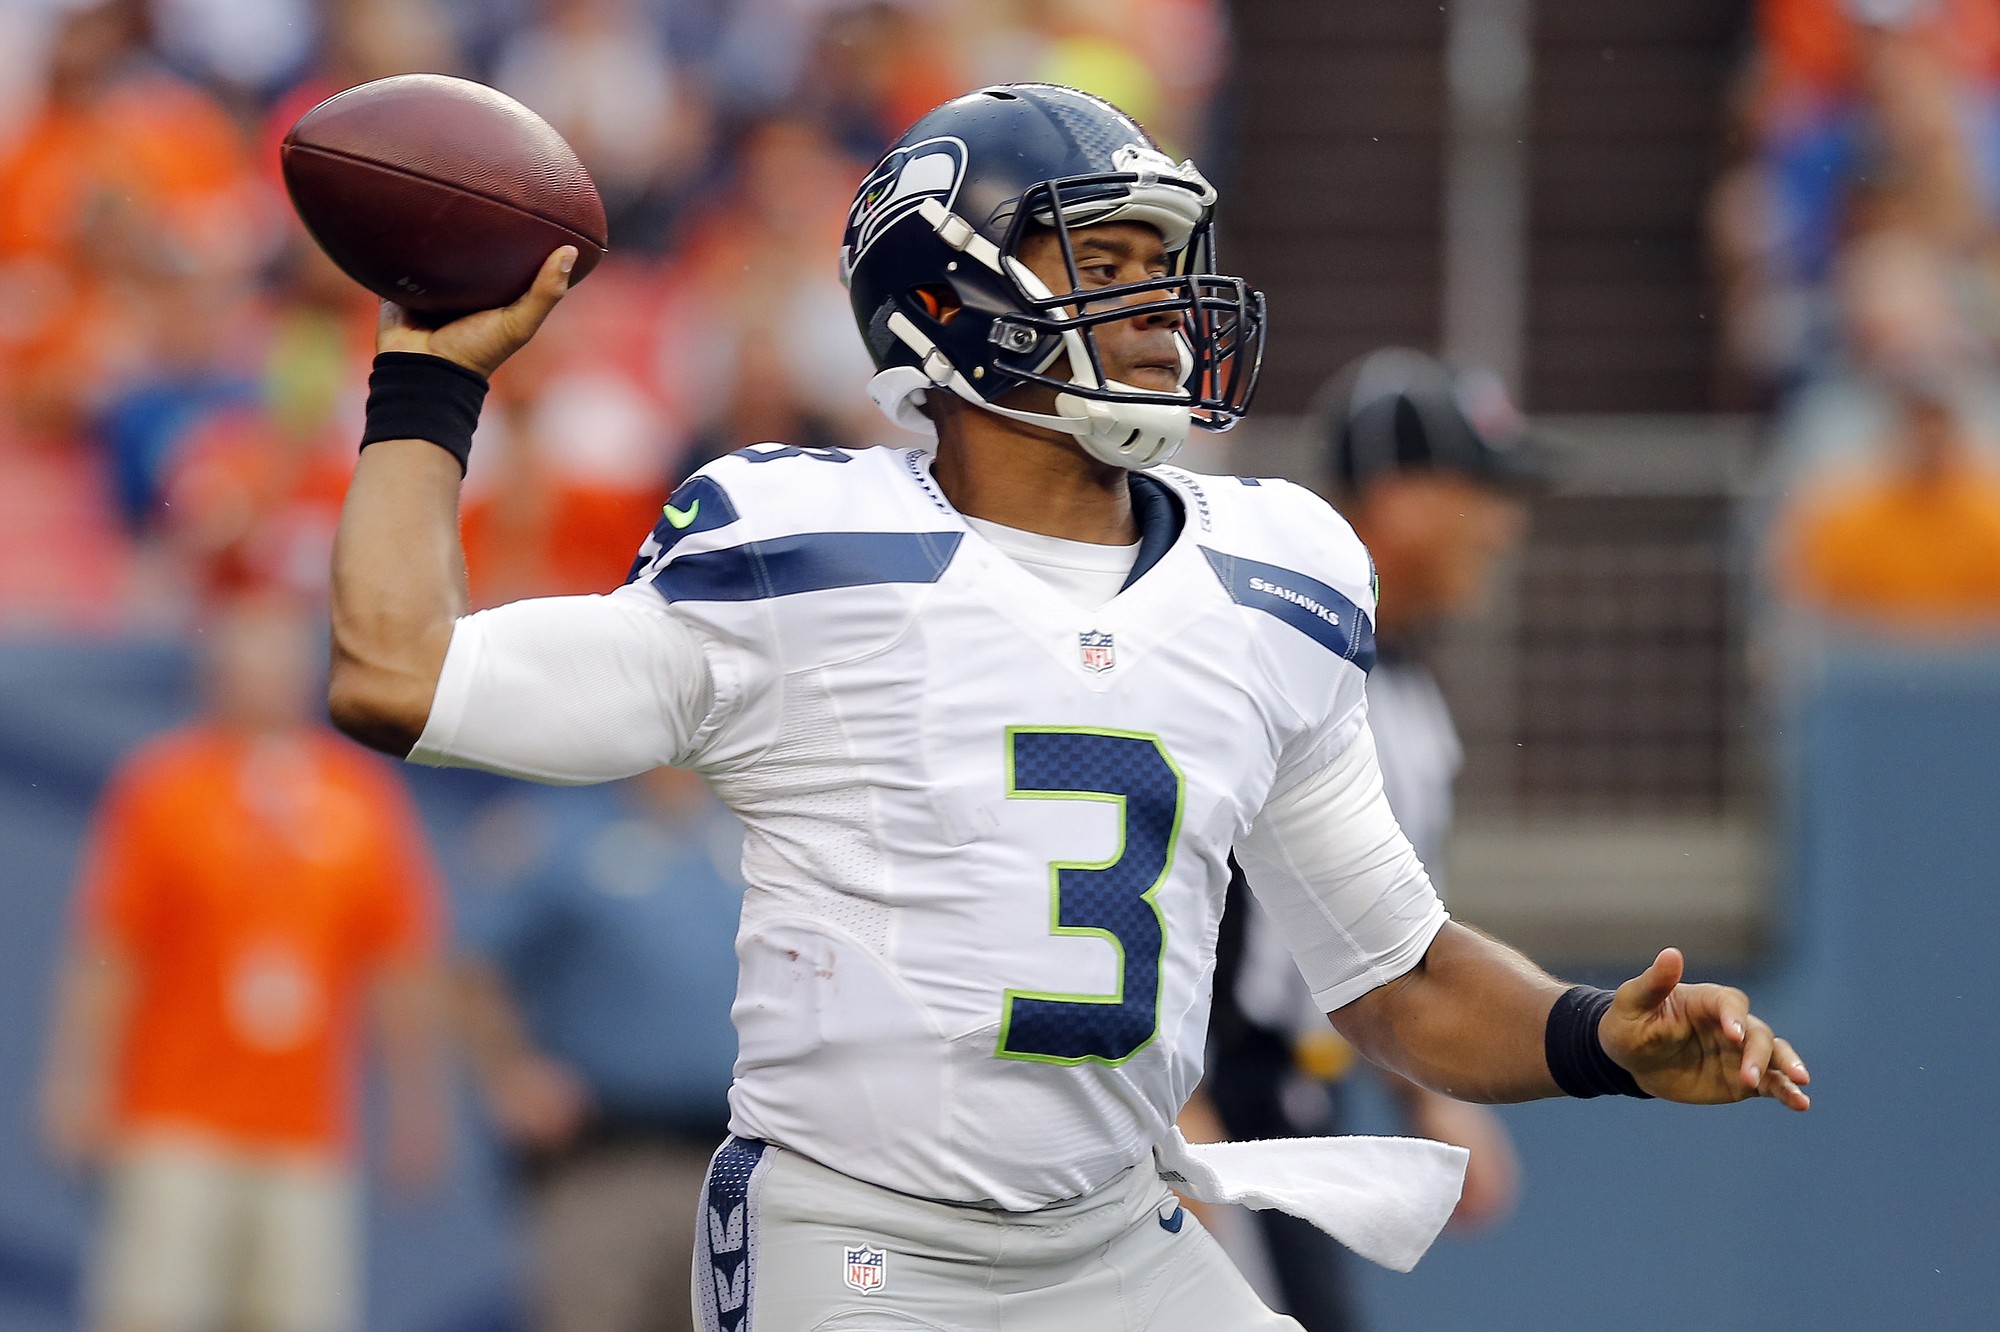 Seattle Seahawks quarterback Russell Wilson (3) throws against the Denver Broncos during the first half of an NFL preseason football game, Thursday, Aug. 7, 2014, in Denver.